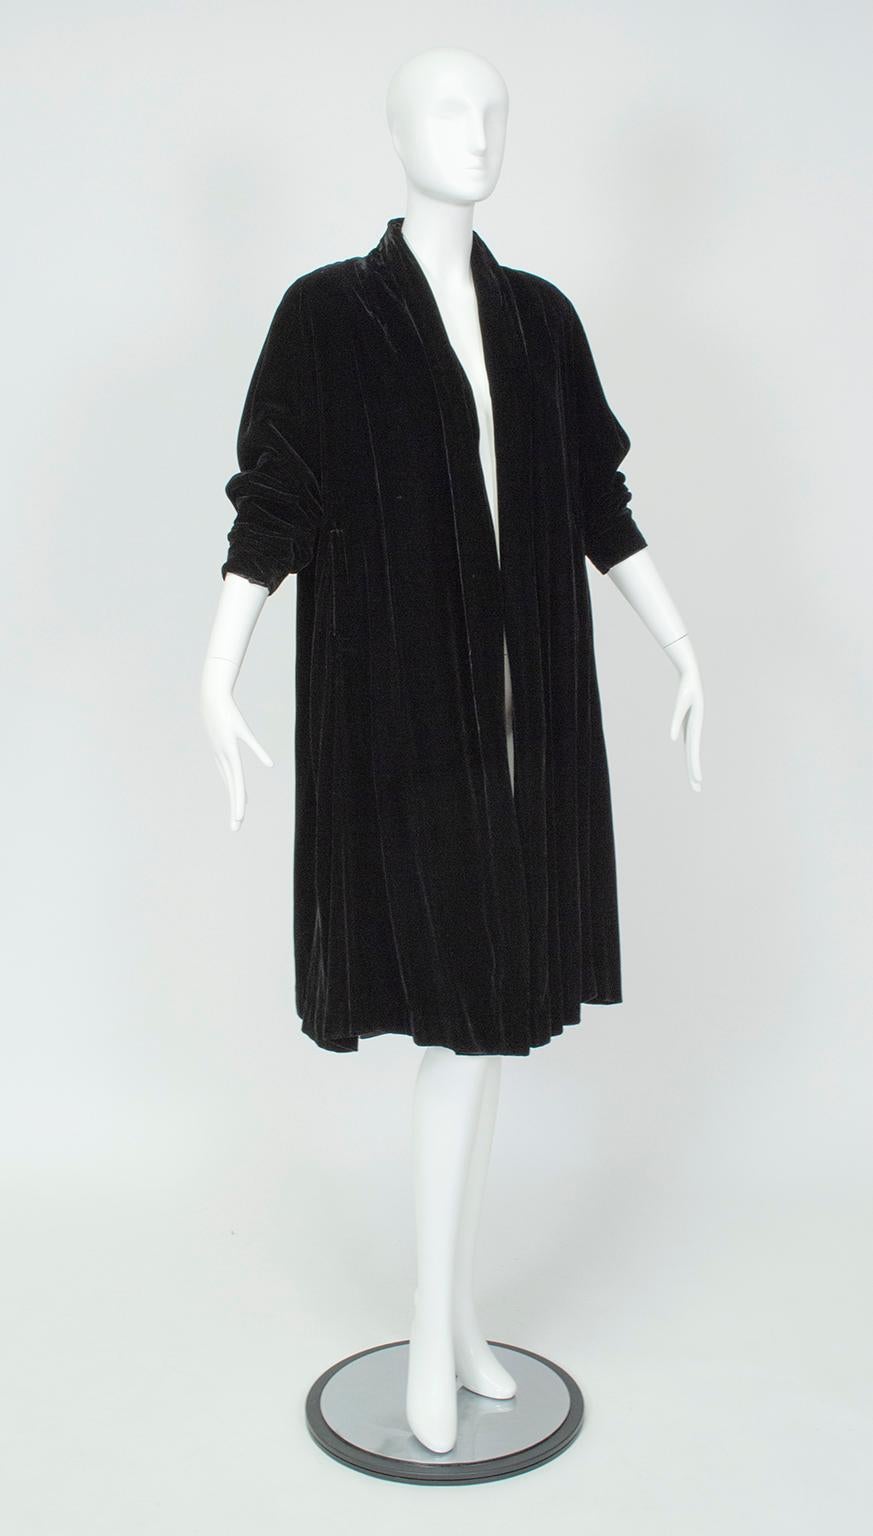 Favored in the mid-century because their volume allowed them to be worn over the full-skirted silhouettes of the time, opera coats still appear on modern runways due to their drama and versatility. Dramatic balloon sleeves and luxe silk velvet make